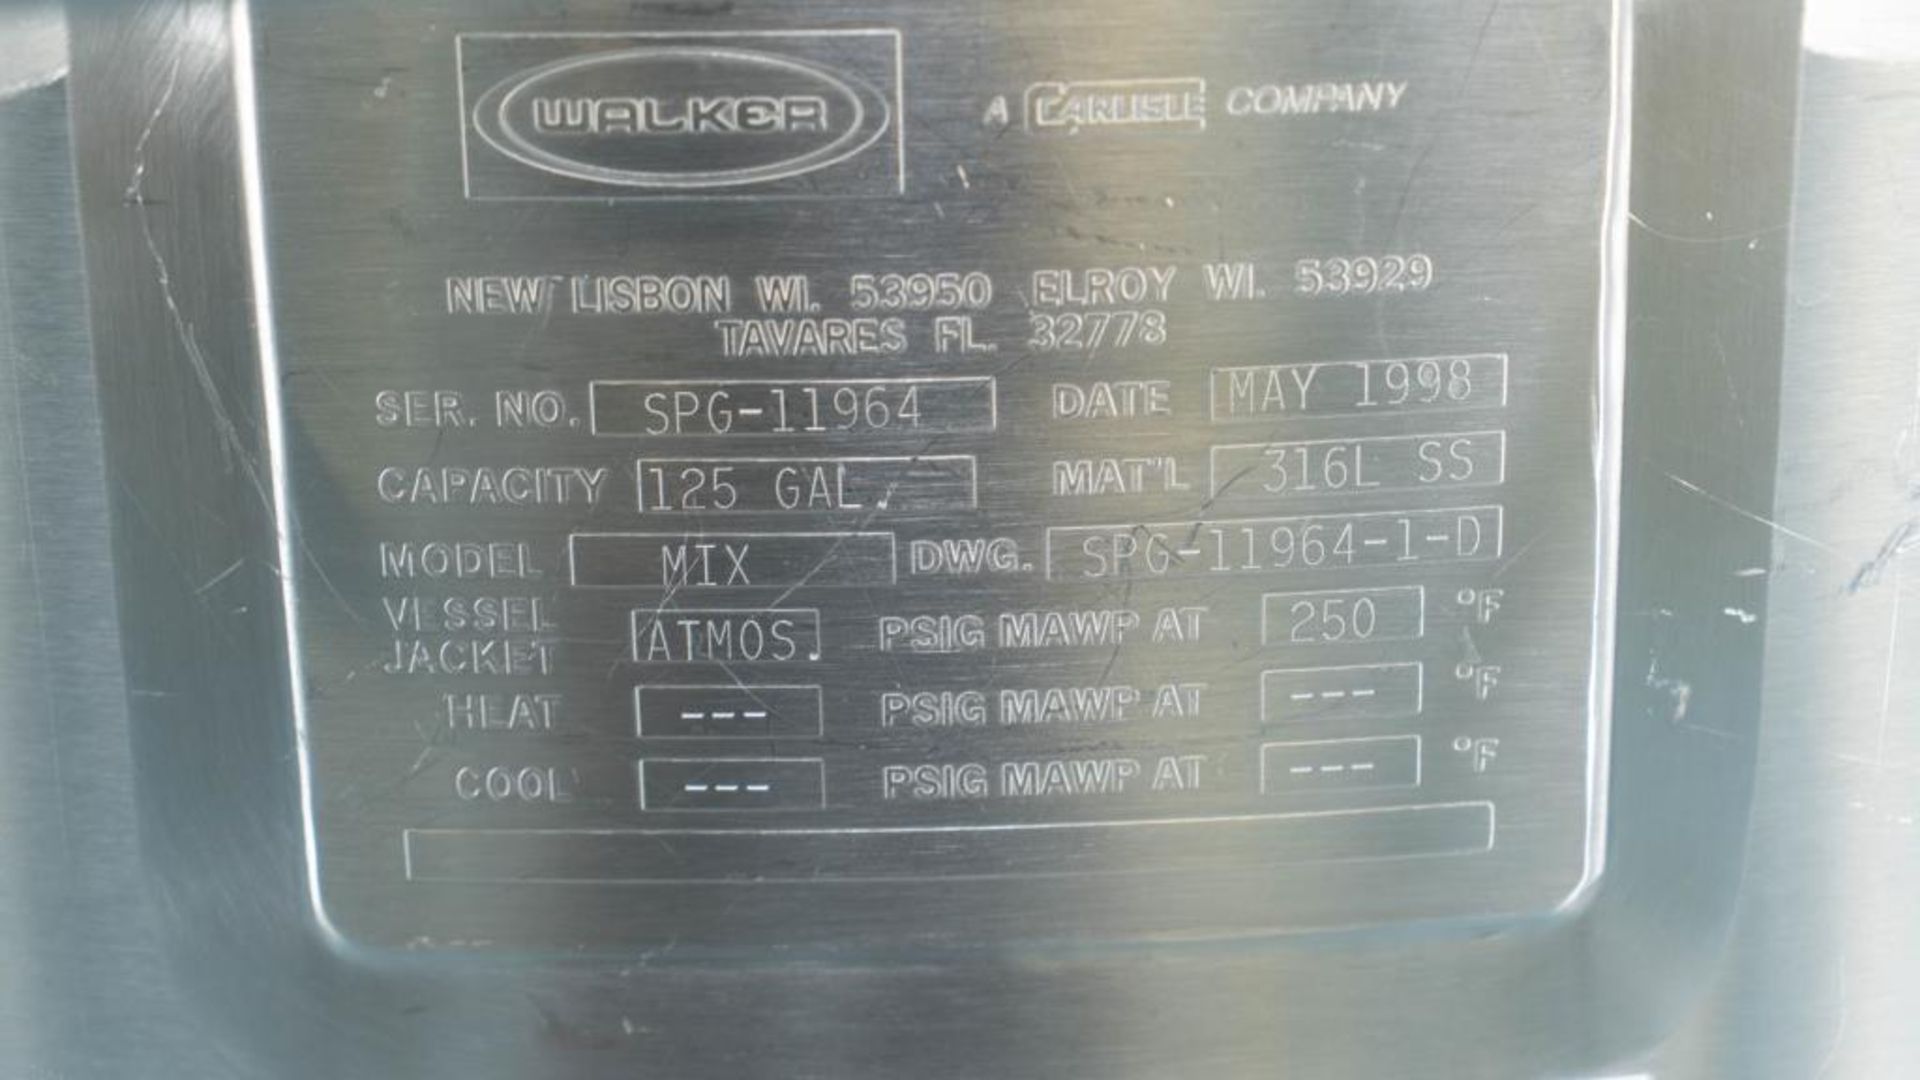 Walker 125 Gallon Stainless Steel Mixing Tank - Image 7 of 9